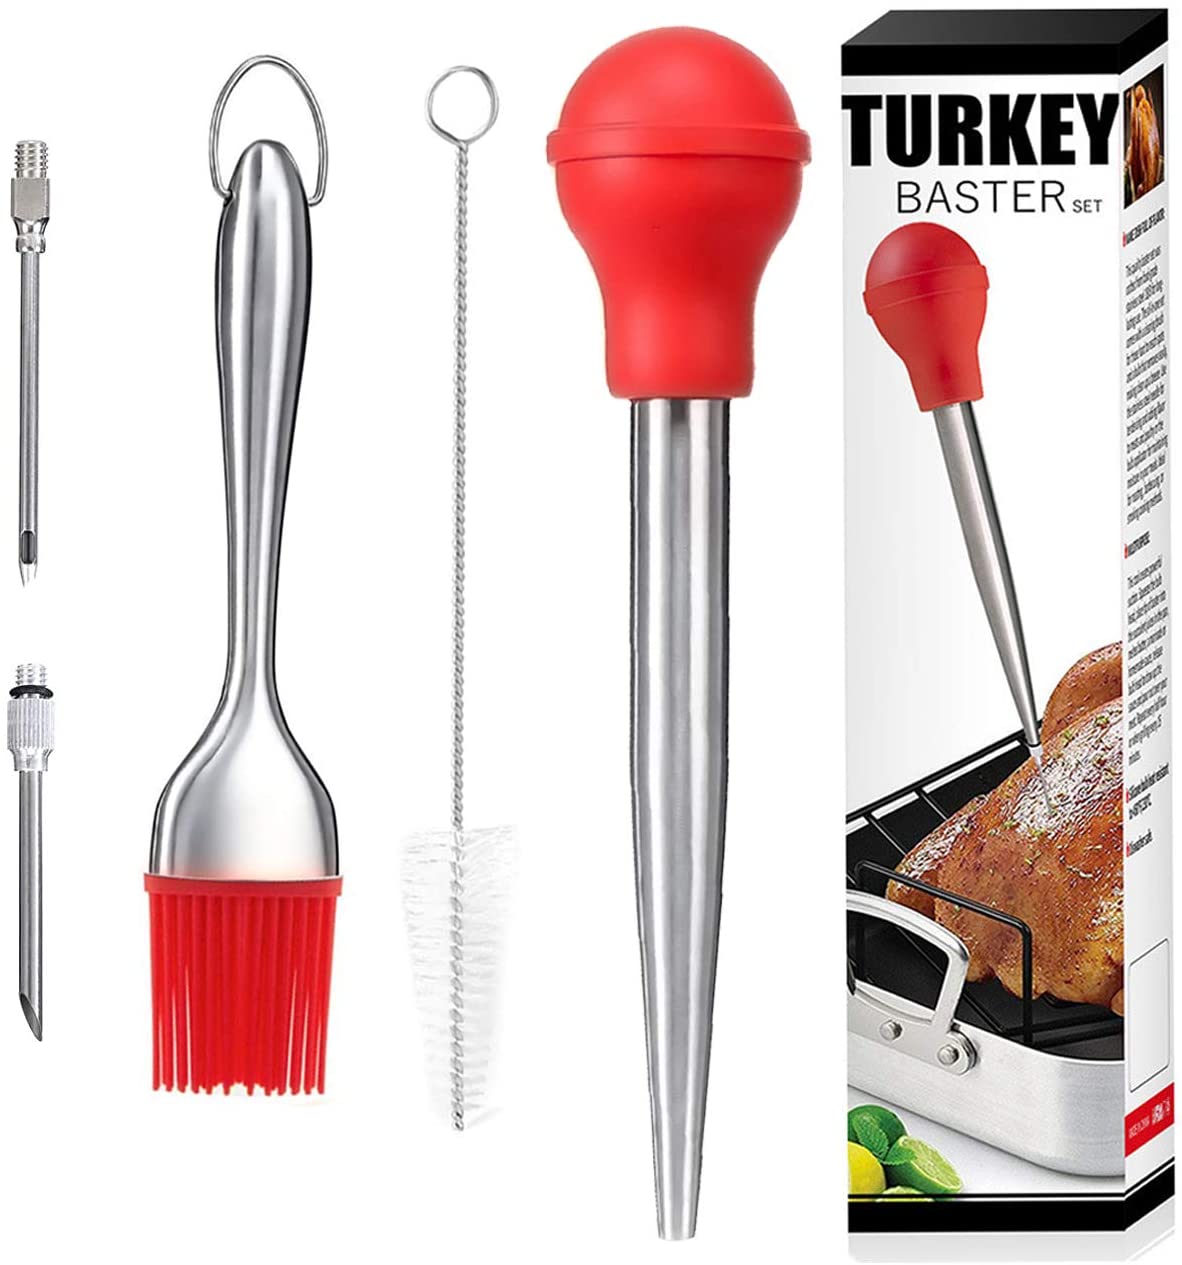 Red Durable Silicone and Stainless Steel Turkey Baster Set